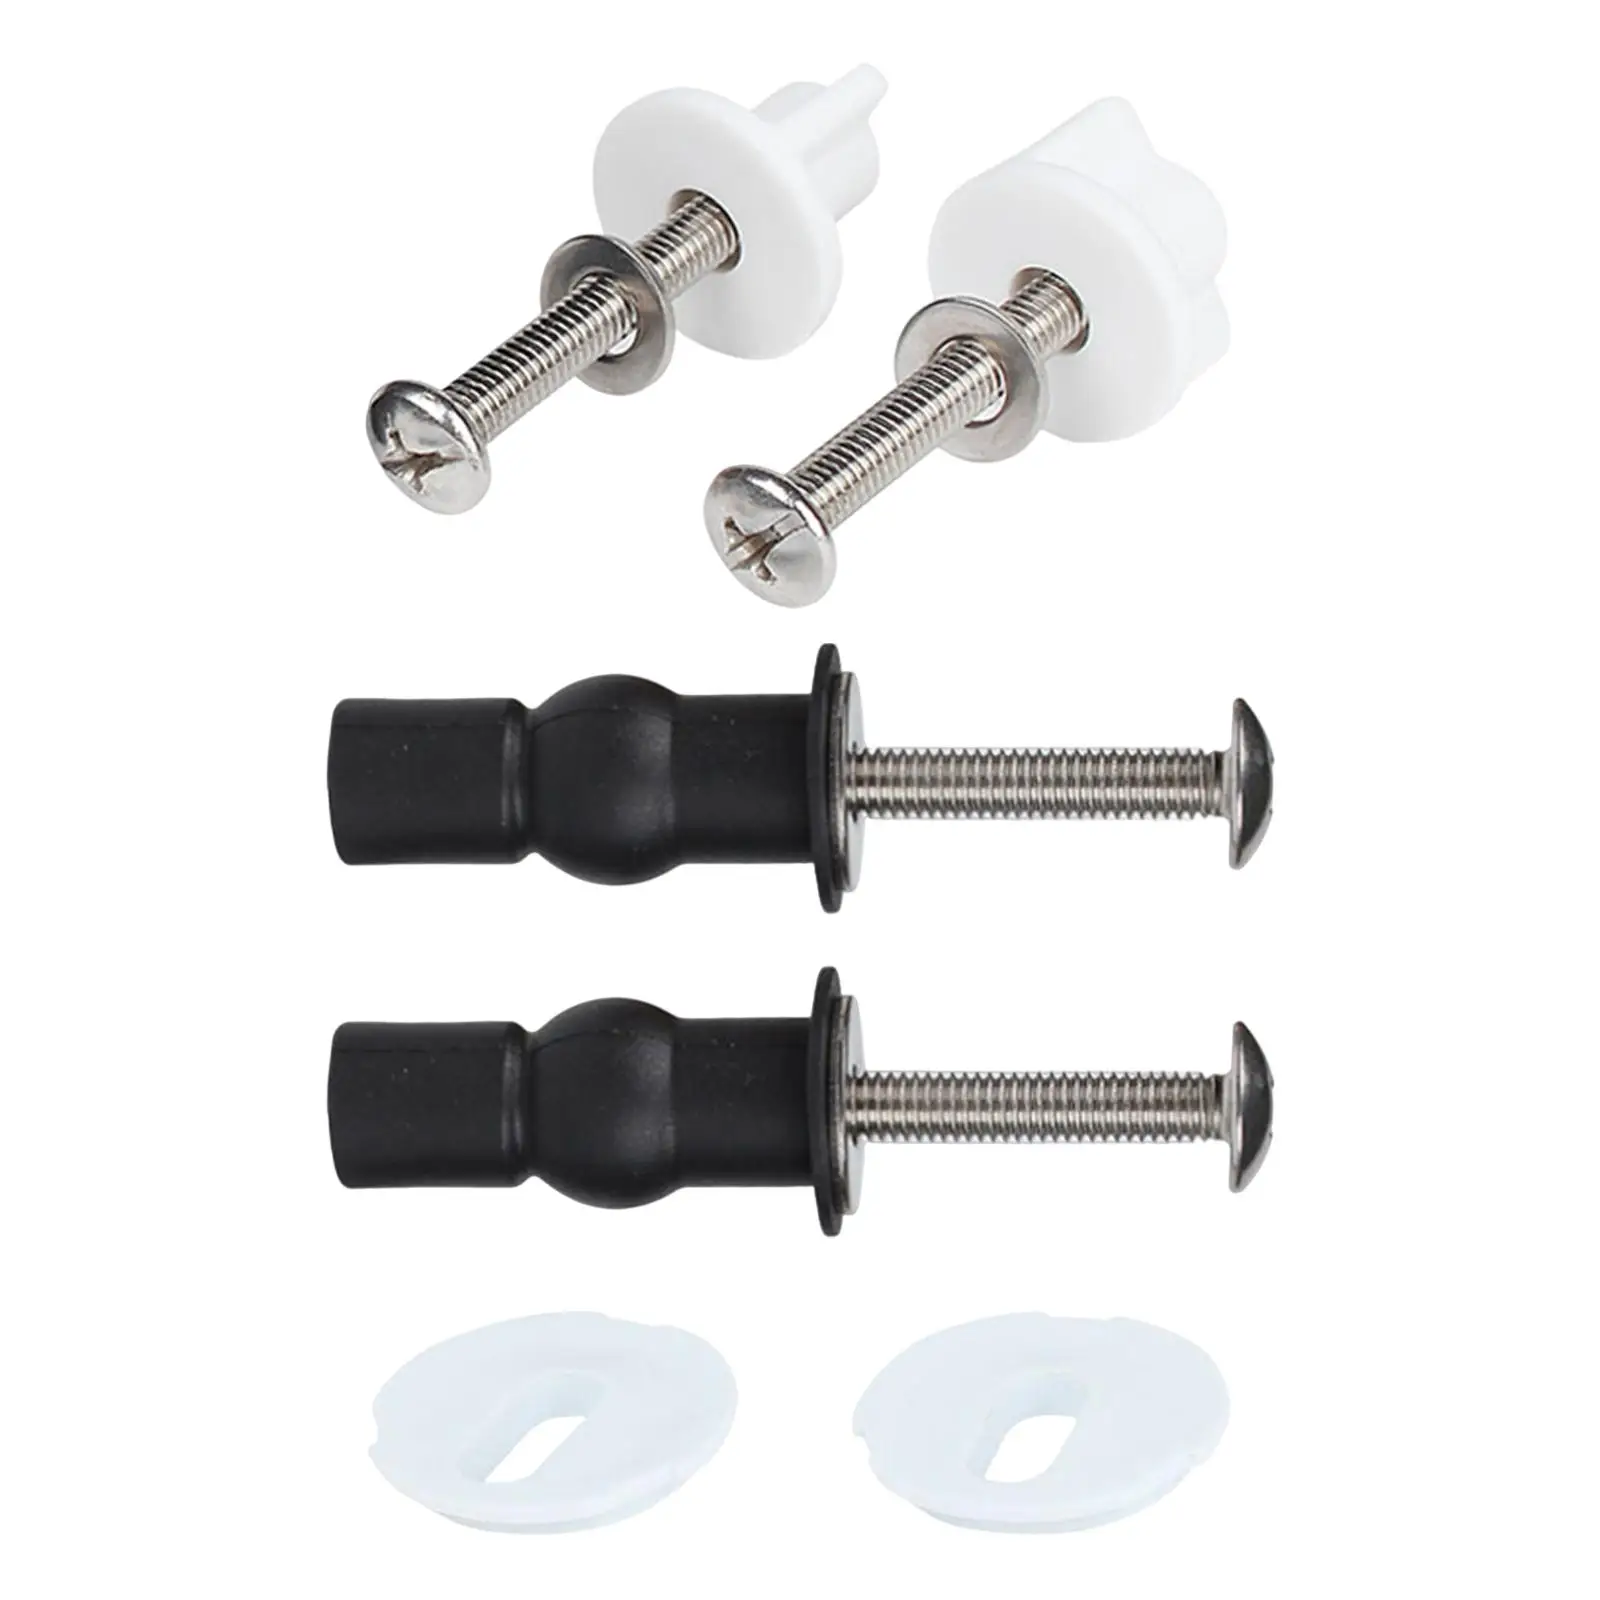 2Pcs Toilet Seat Screws Bolts Nuts and Metal Washers Replacement Parts Toilet Bolts Universal Top Mounted Toilet Seat Hinges